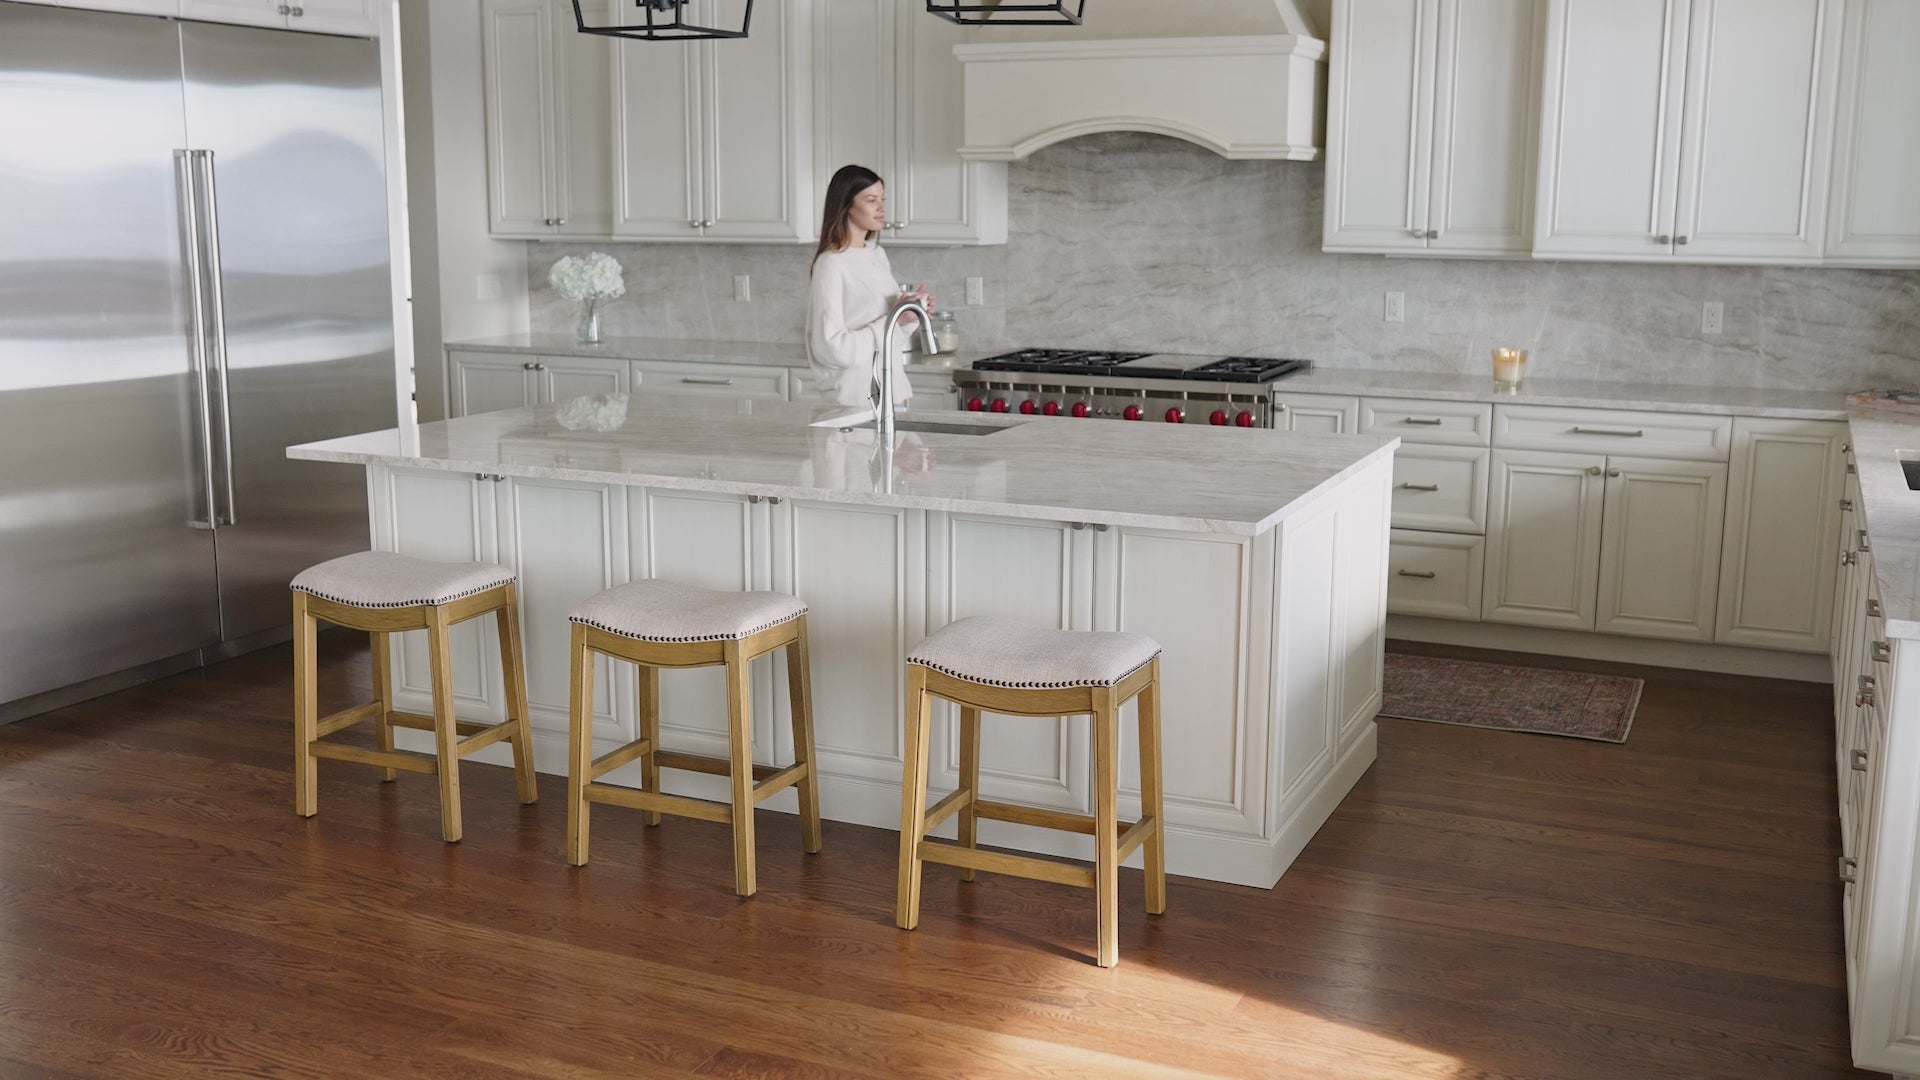 A short video featuring the Adrien Saddle Bar Stool with a Natural Finish in a kitchen setting.